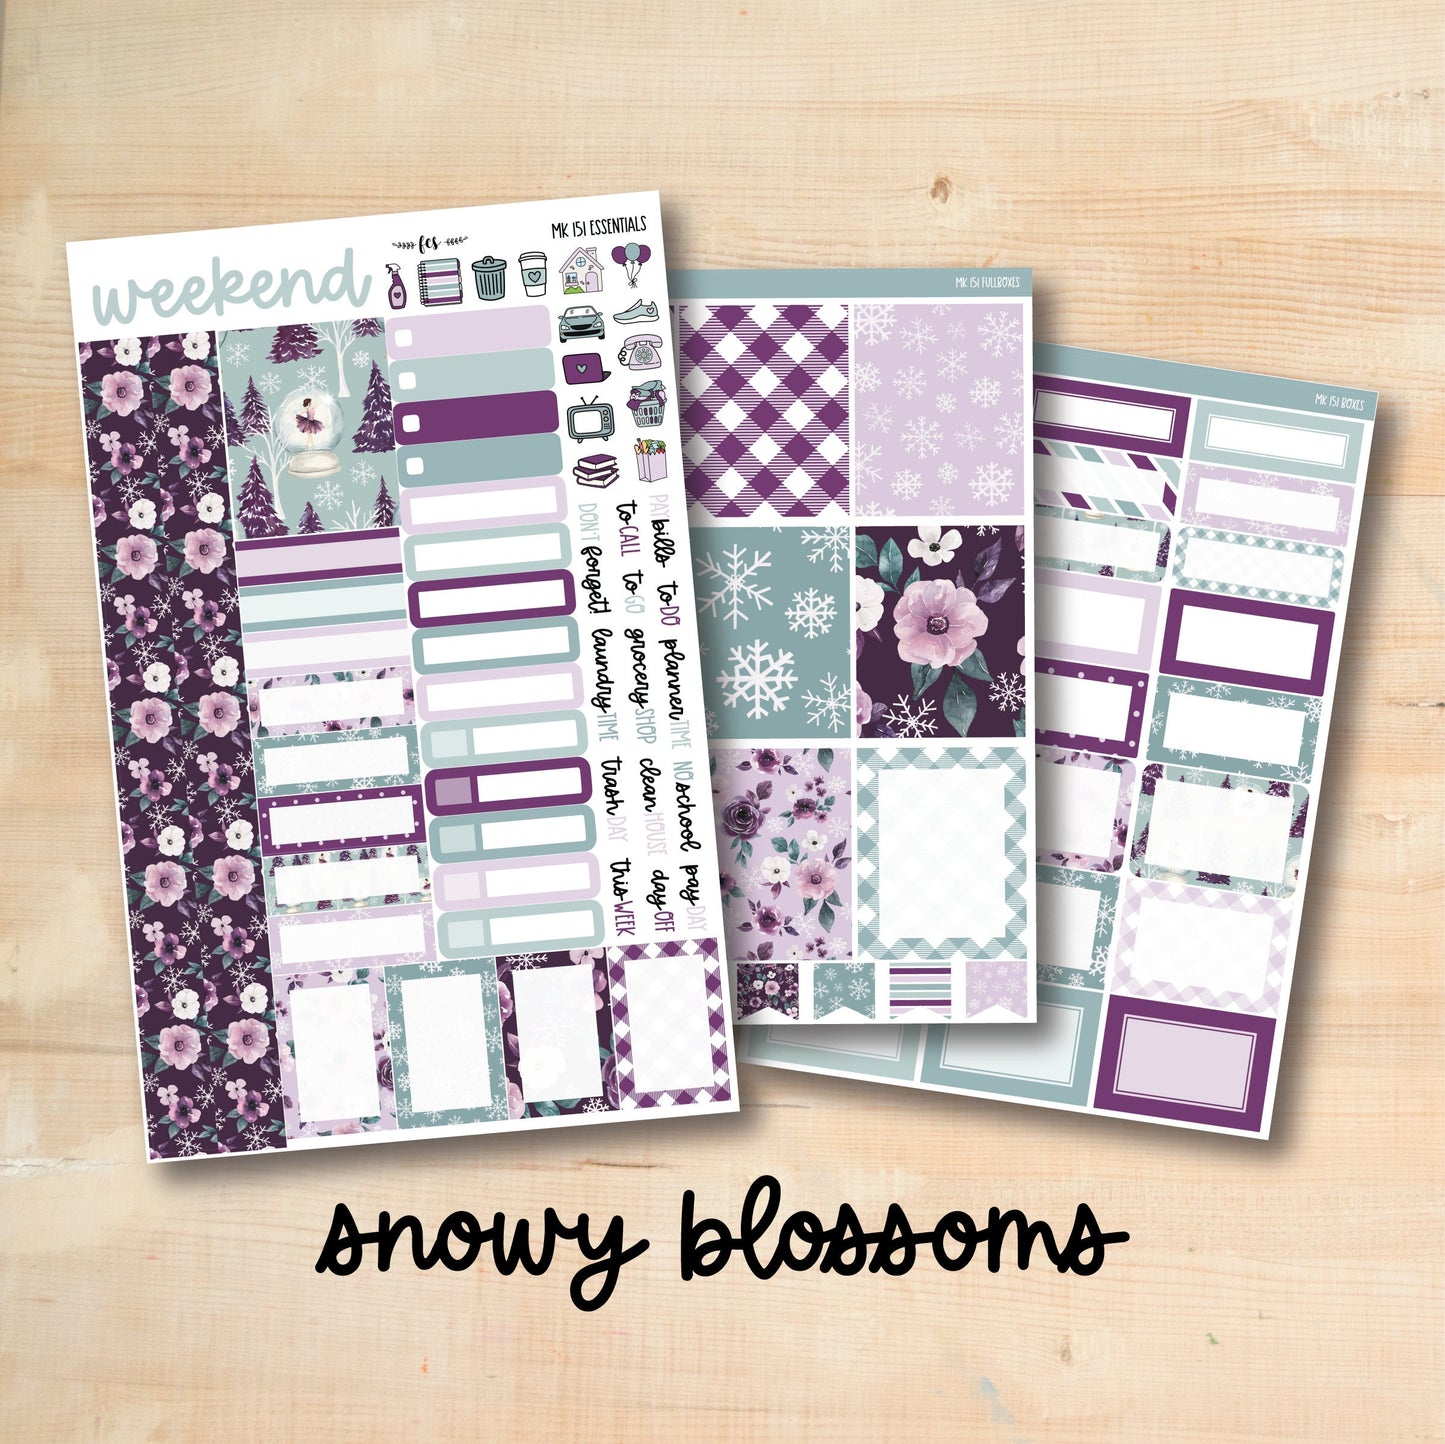 MK-151 || SNOWY BLOSSOMS weekly planner kit for Erin Condren, Plum Paper, MakseLife and more!